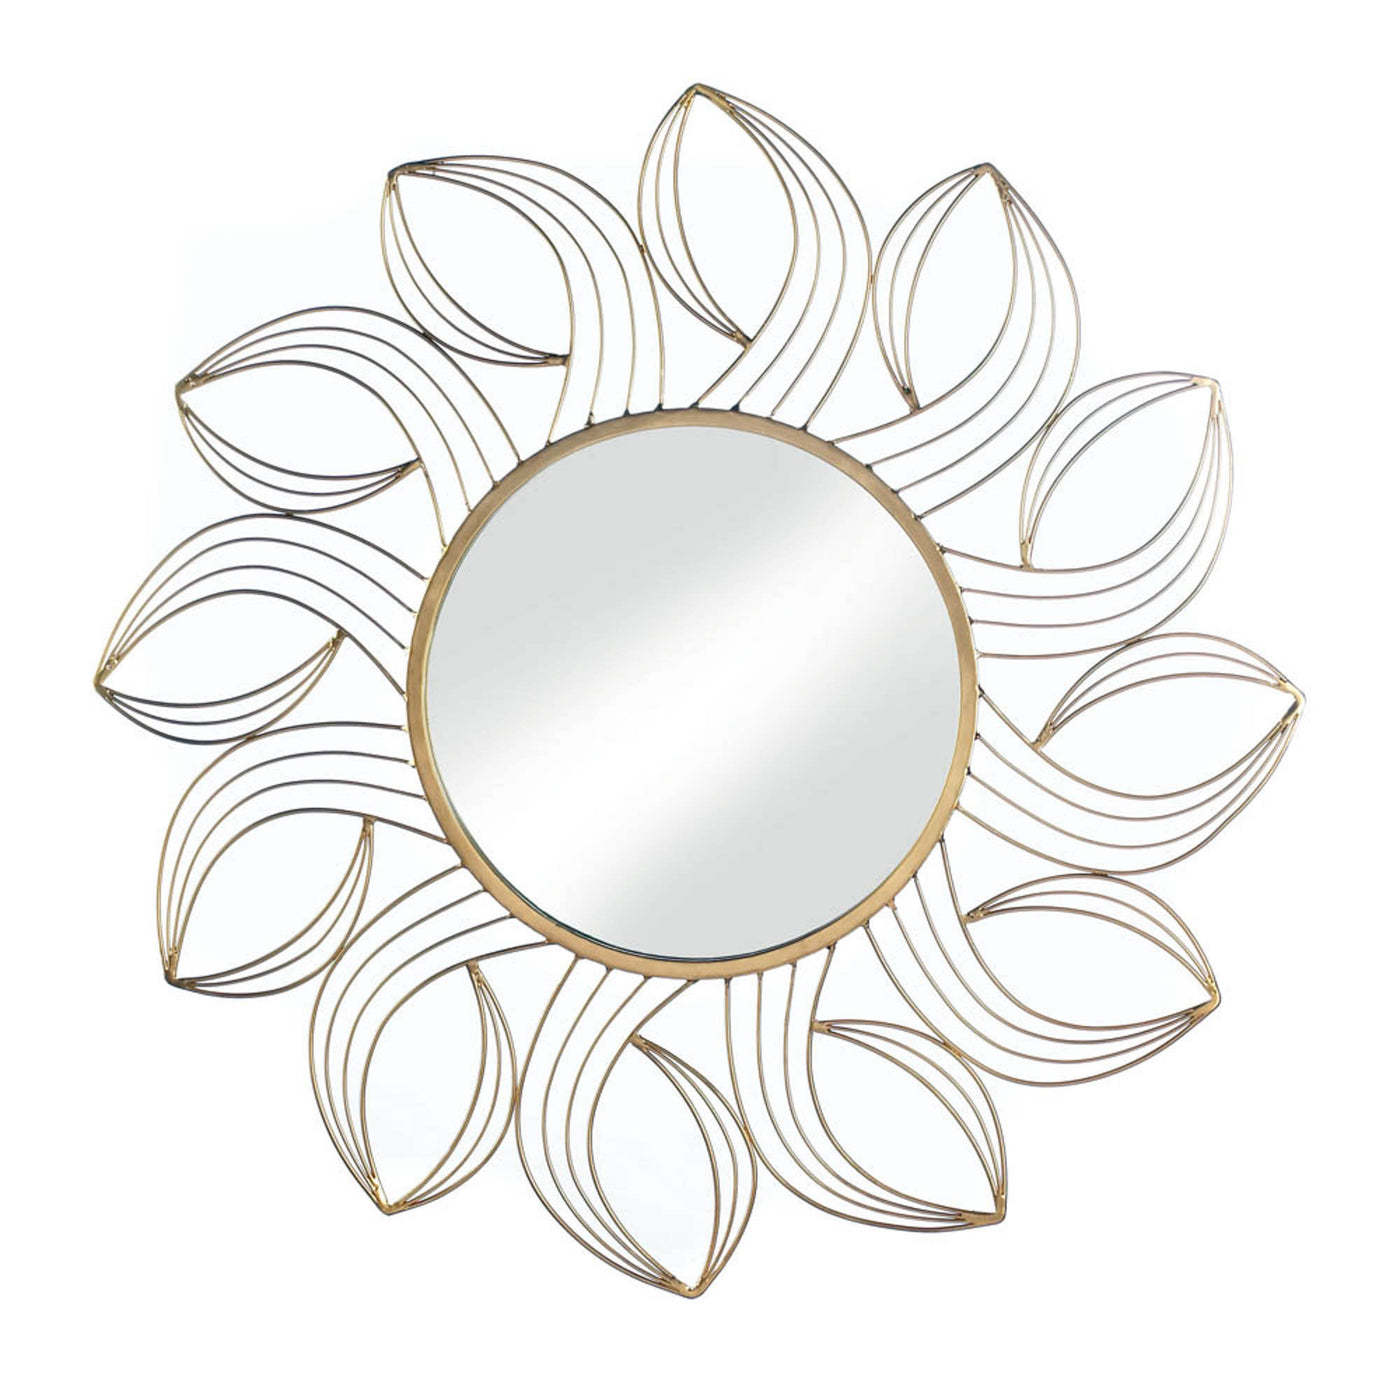 Primary image for GOLDEN PETAL WALL MIRROR